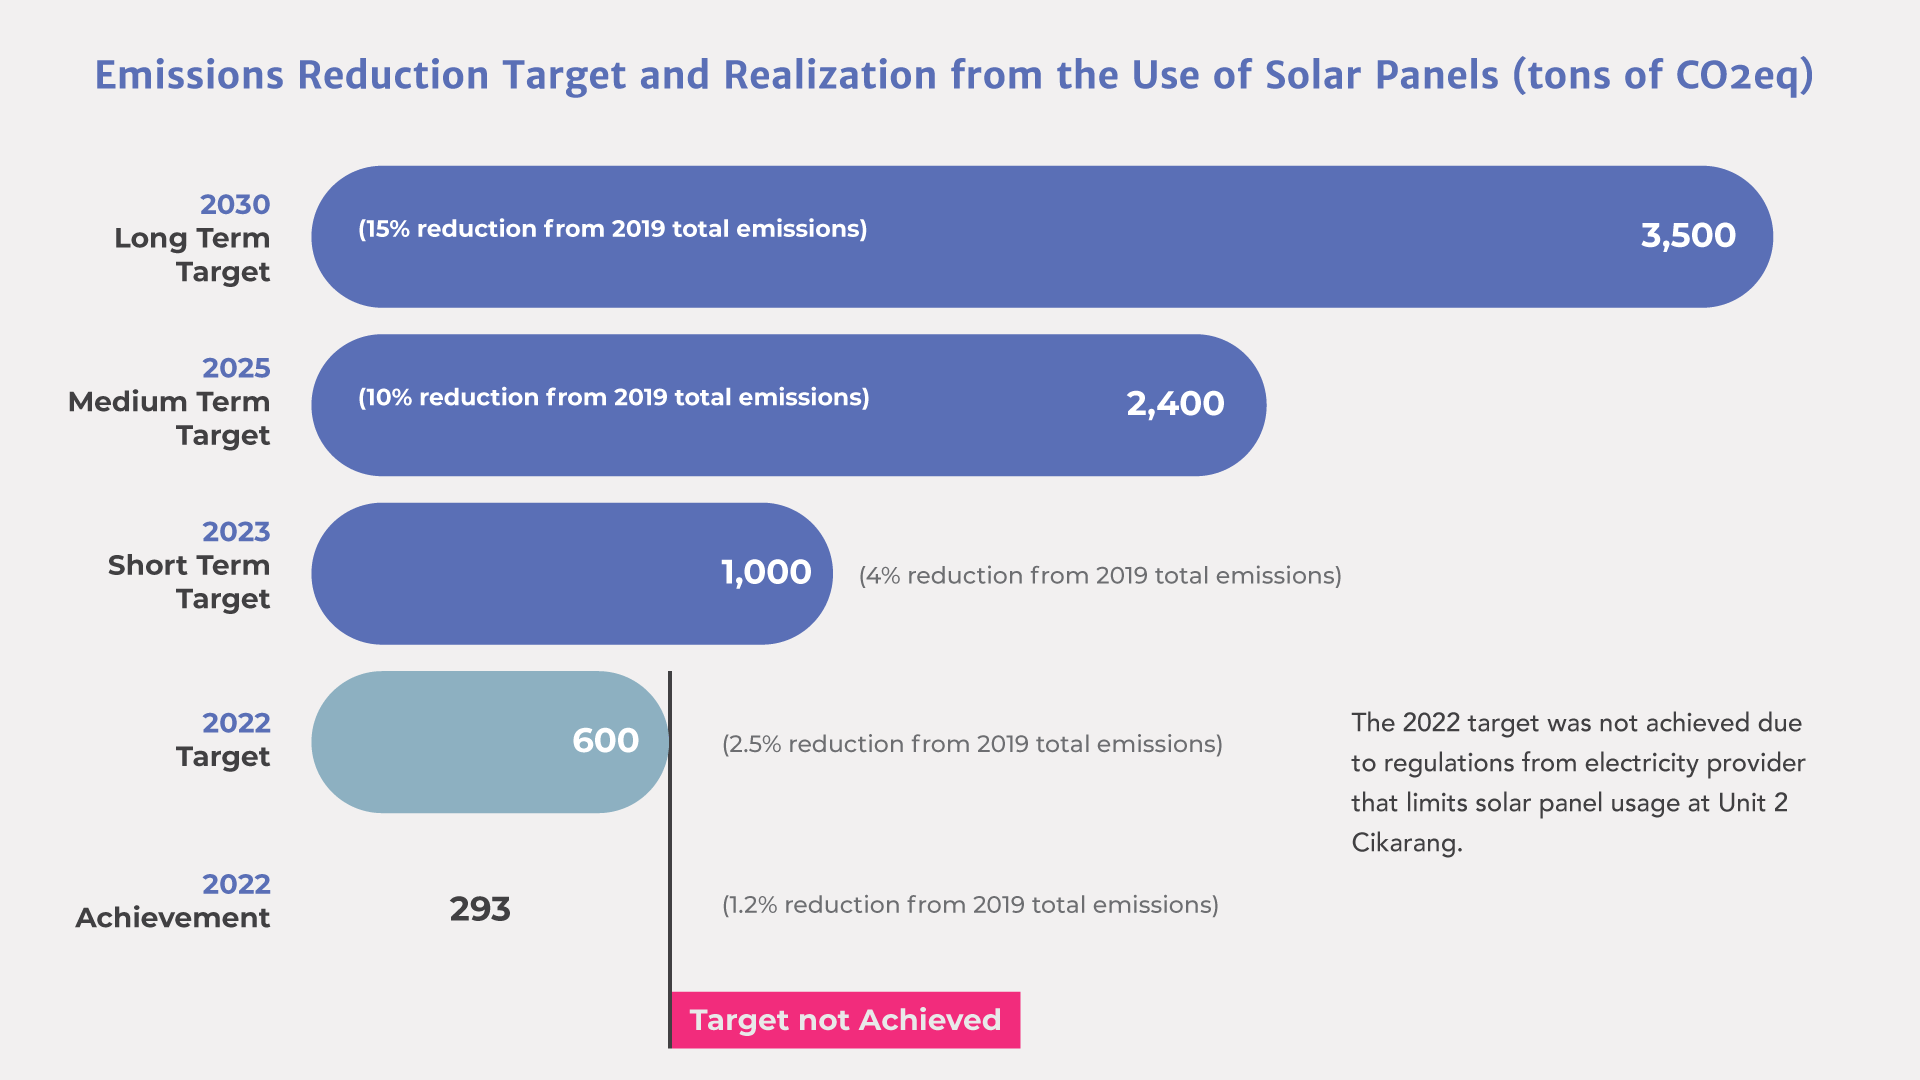 emissions reductions use of solar panel 2022